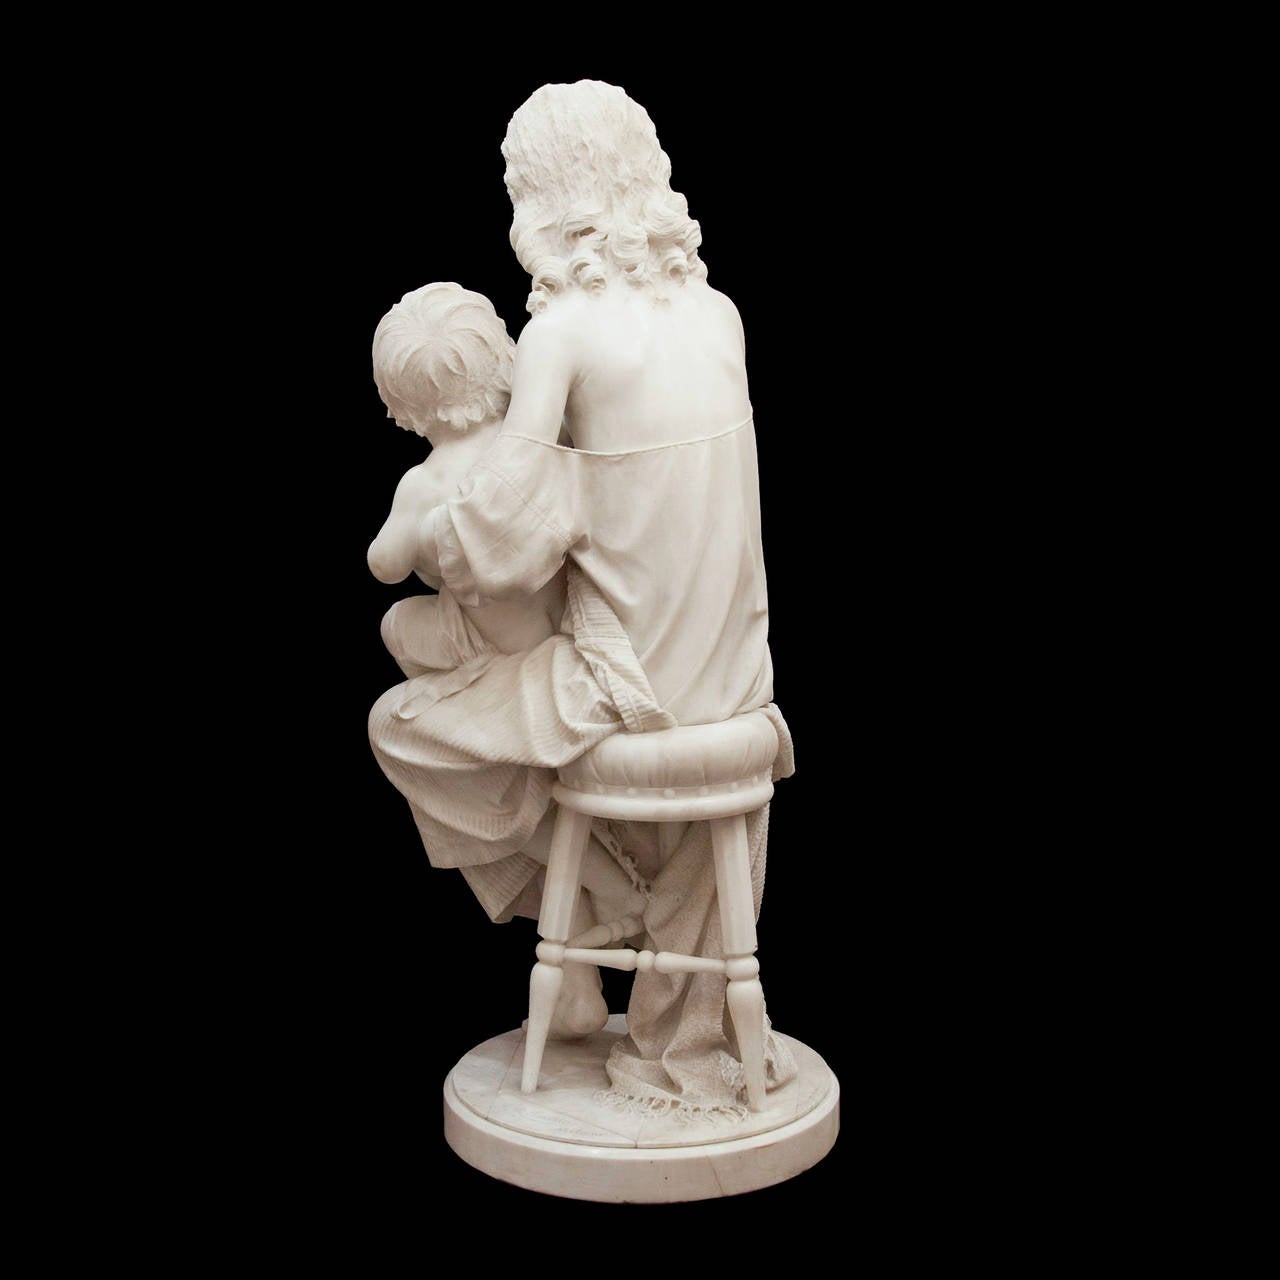 Carved Fine White Marble Figural Group 'Big Sister' by R. Pereda